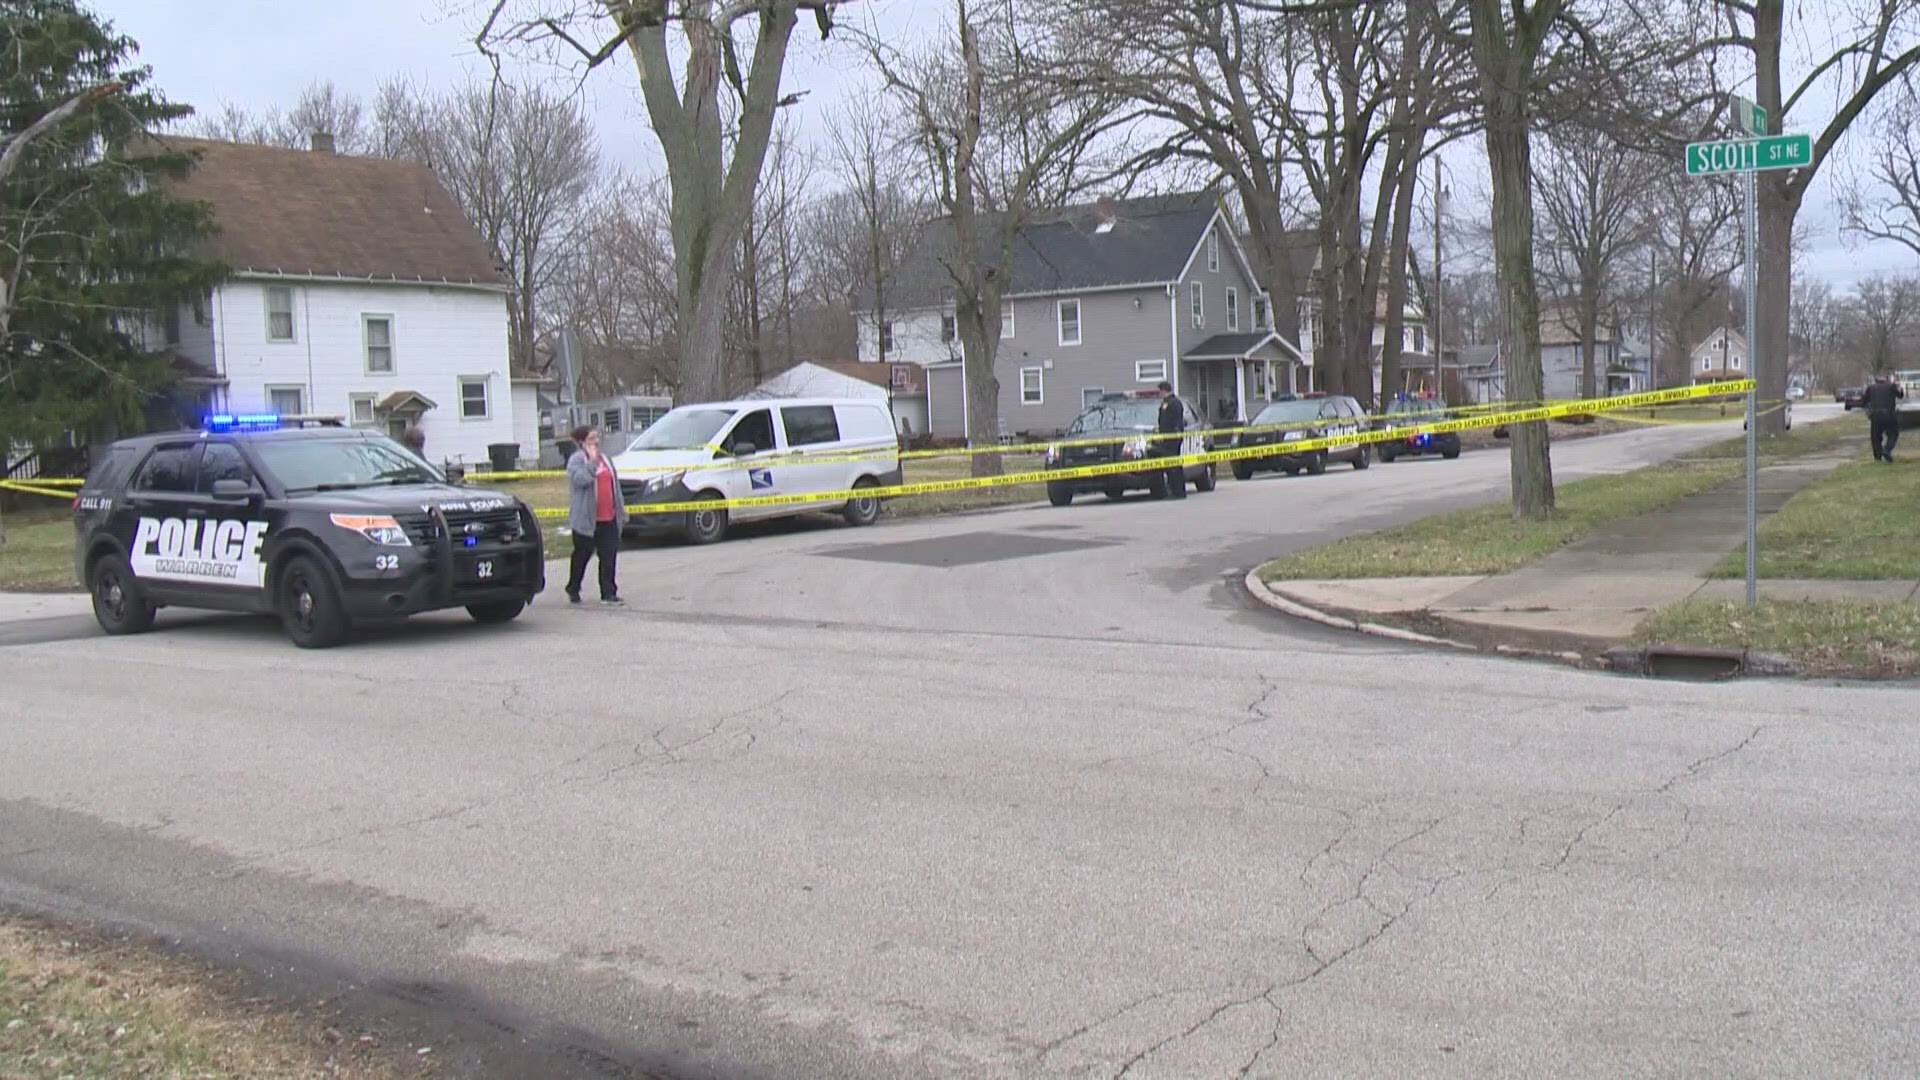 An investigation is underway after a U.S. Postal Service mail carrier was shot and killed in Warren.